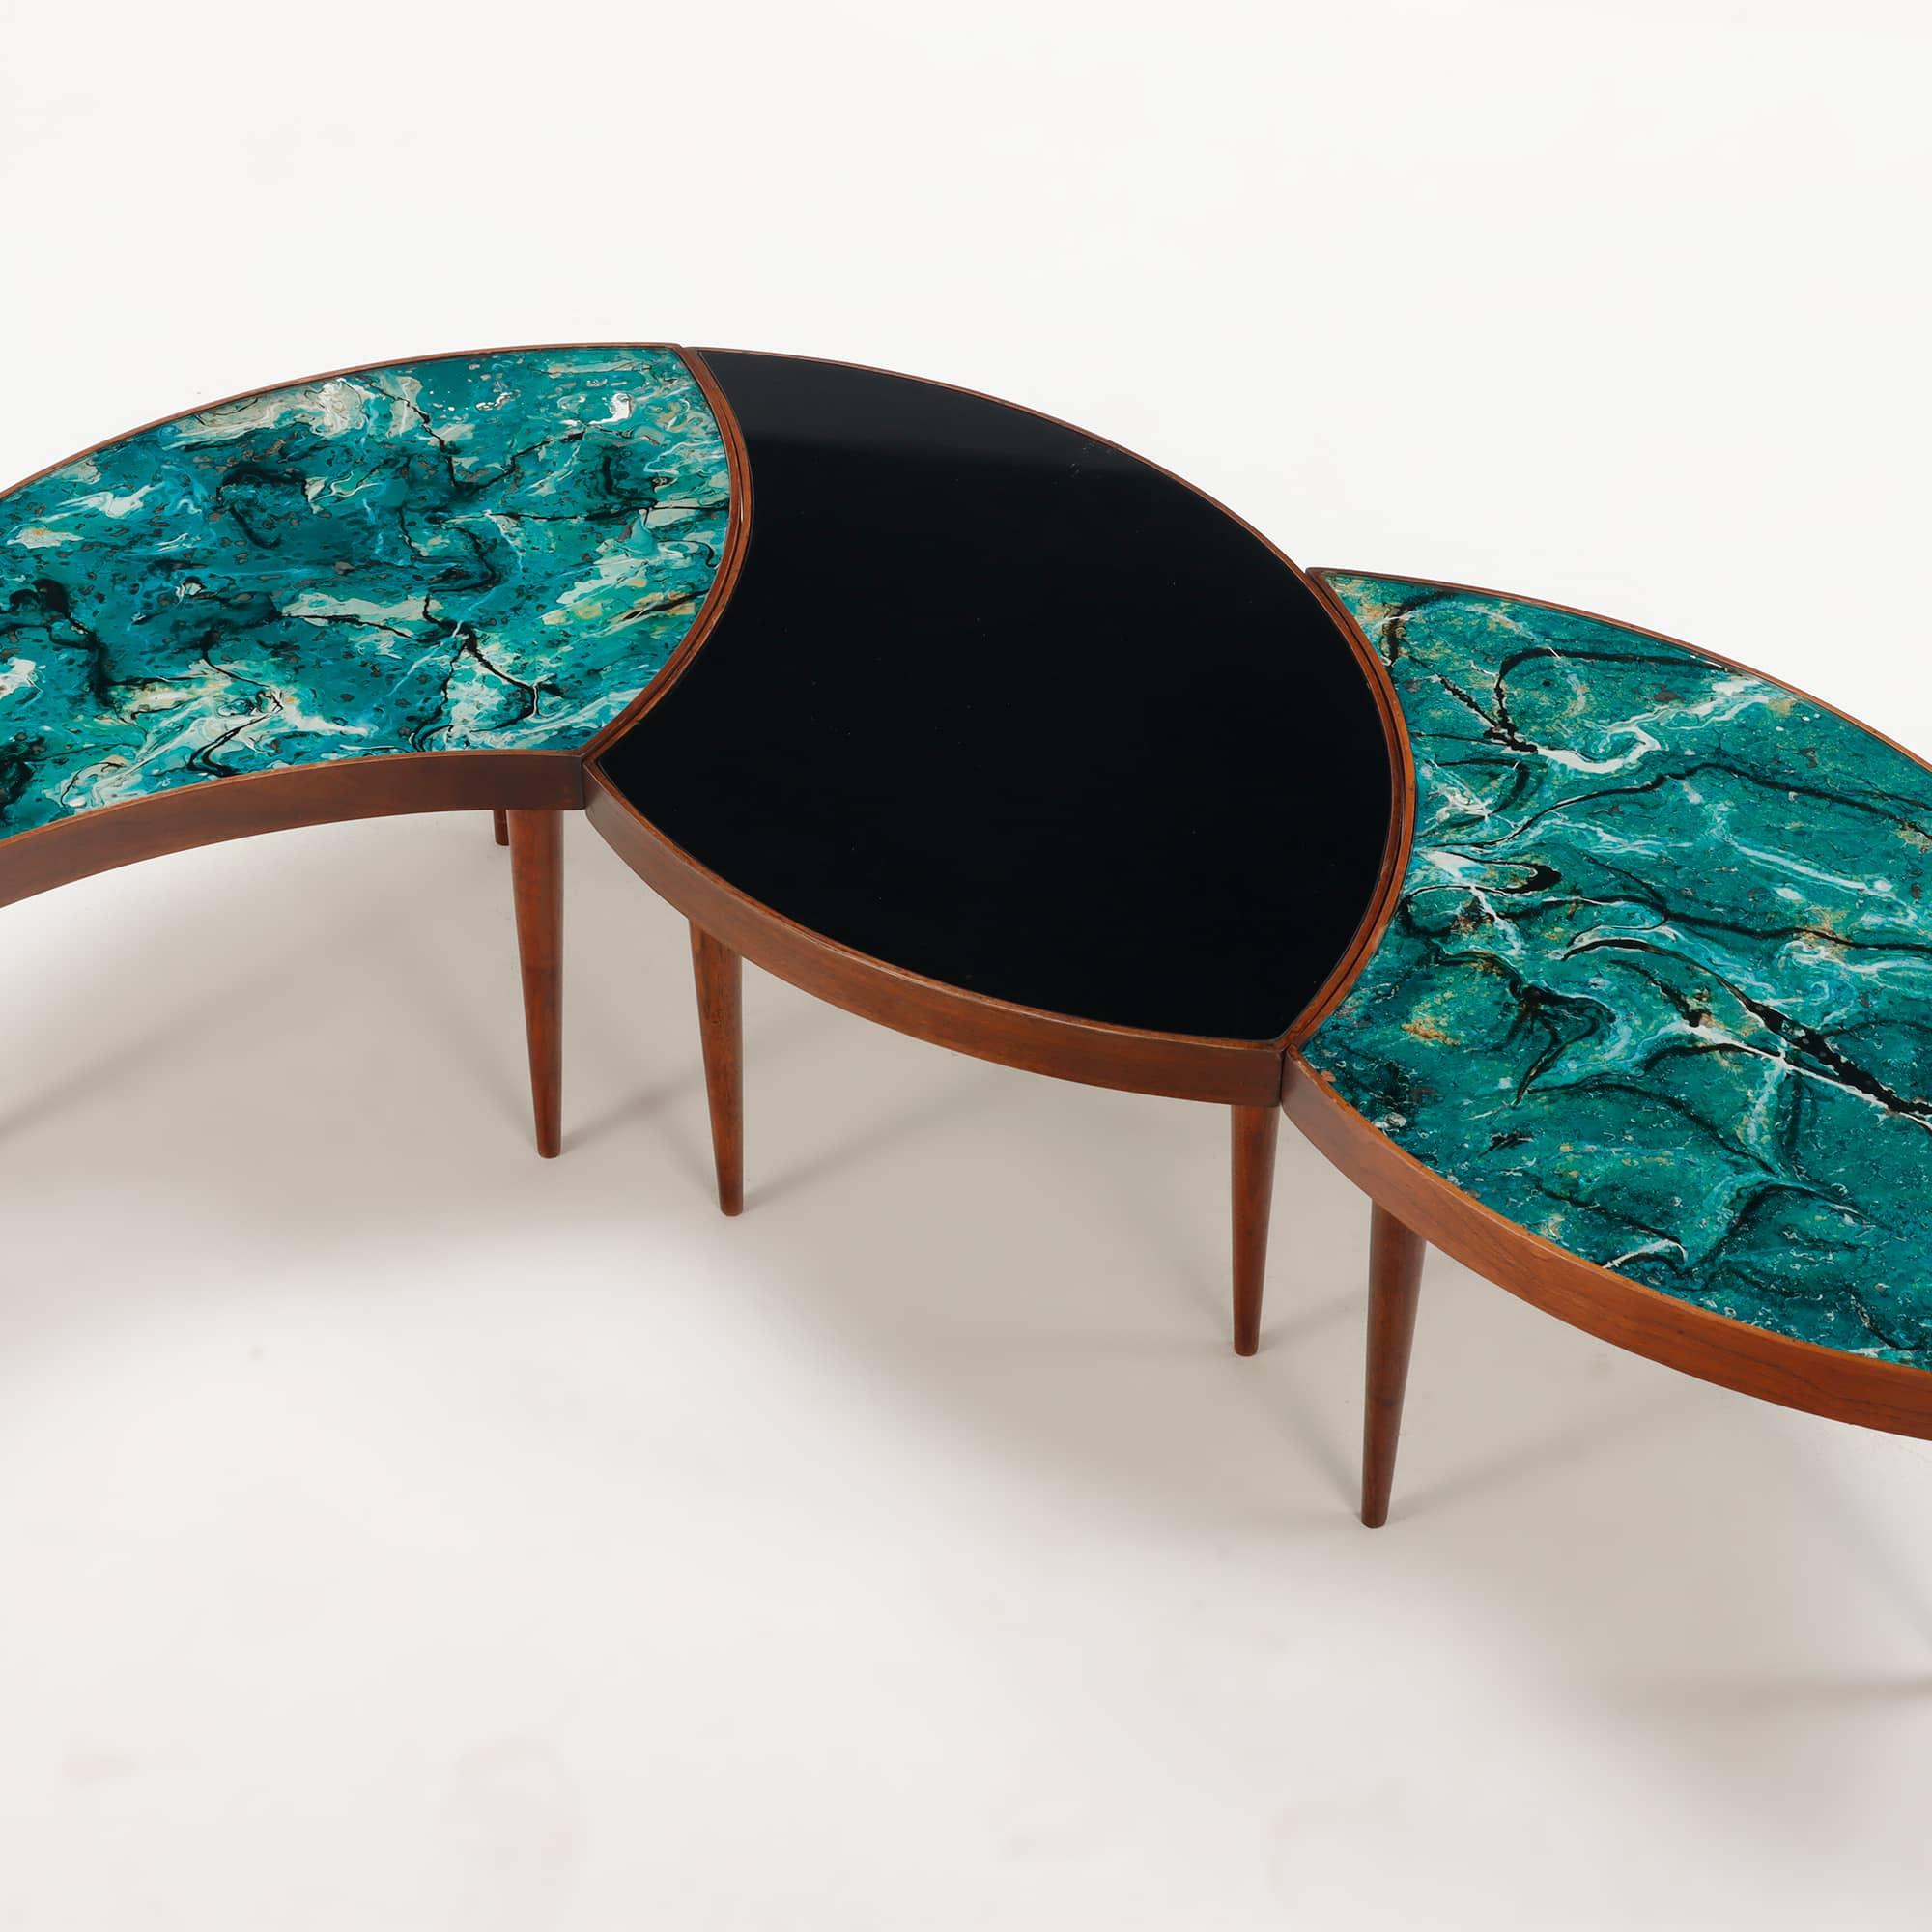 American A three-part biomorphic marbleized glass and walnut circular coffee table. For Sale